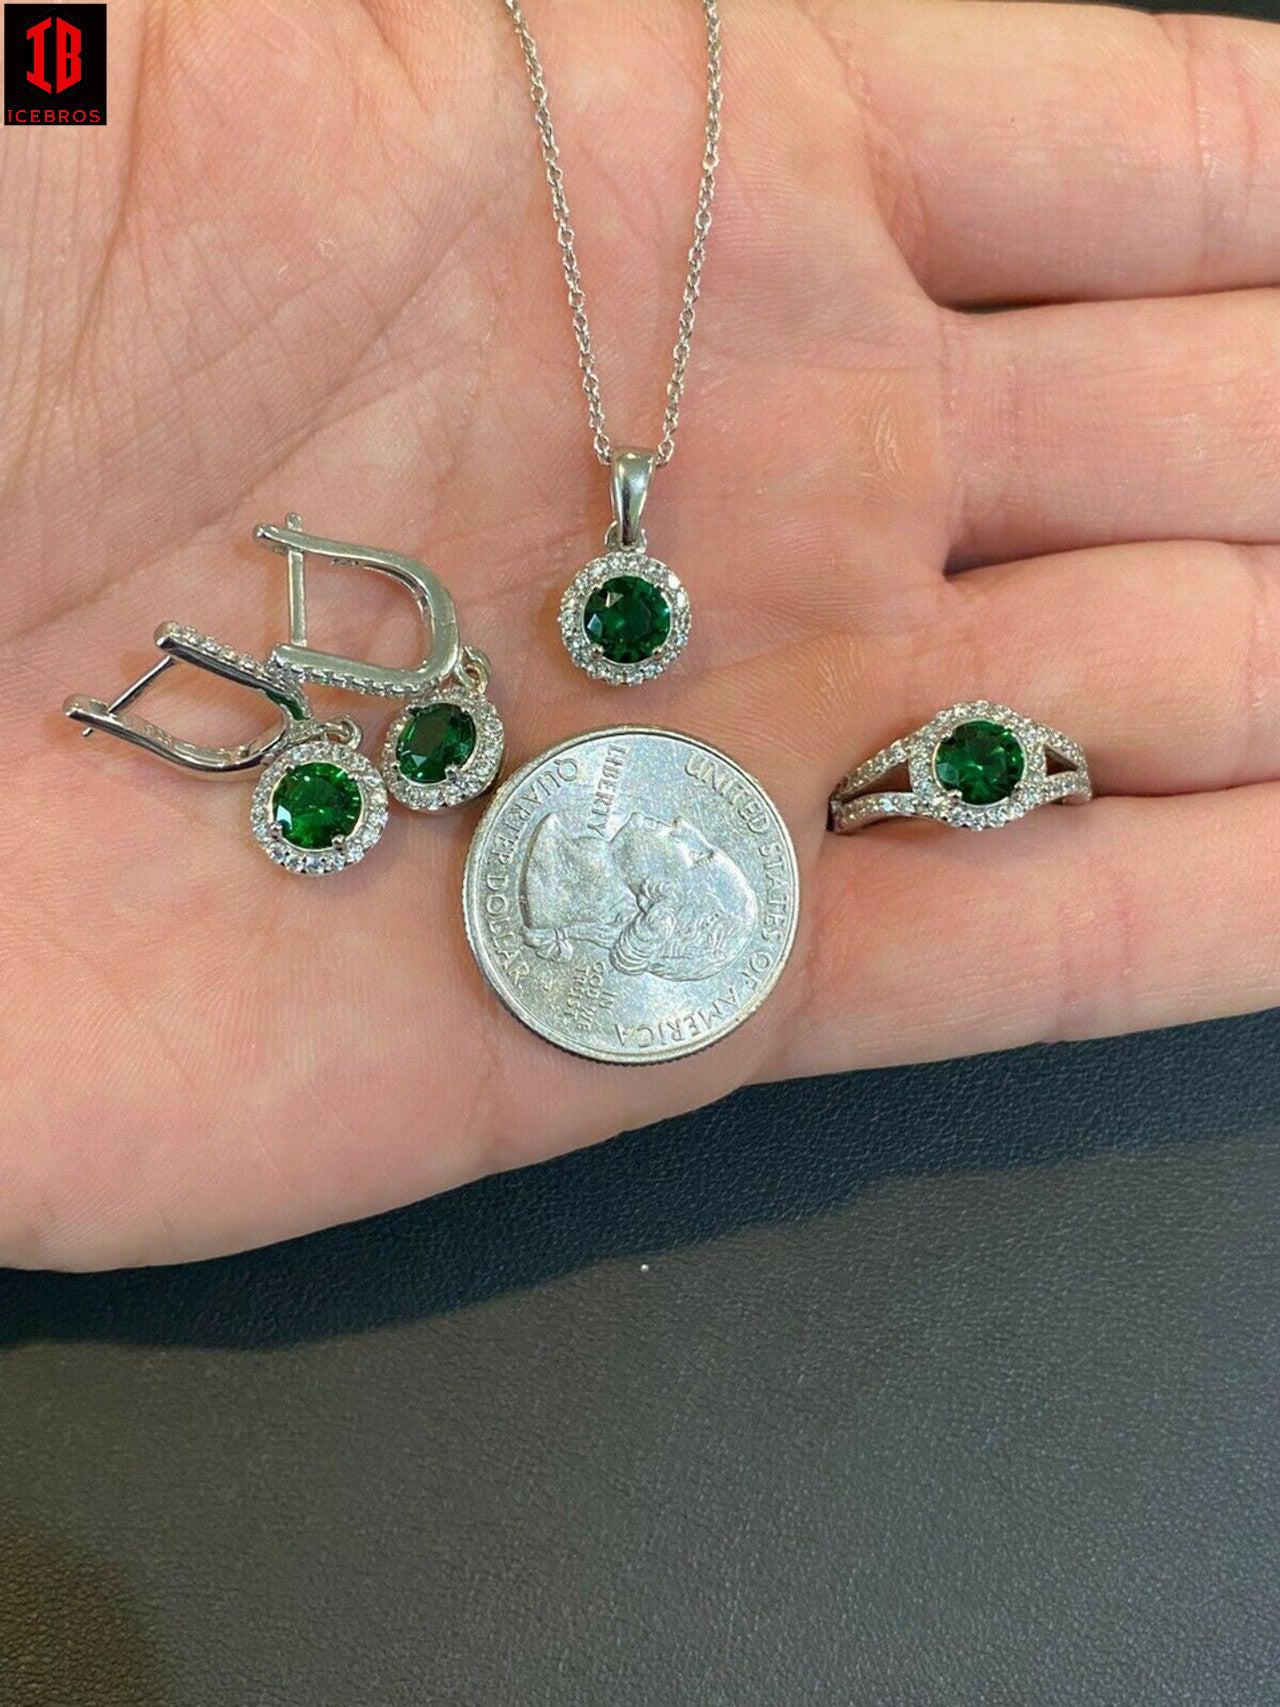 Real 925 Silver Green Emerald Diamond Ring Pendant Necklace Earrings Jewelry Set